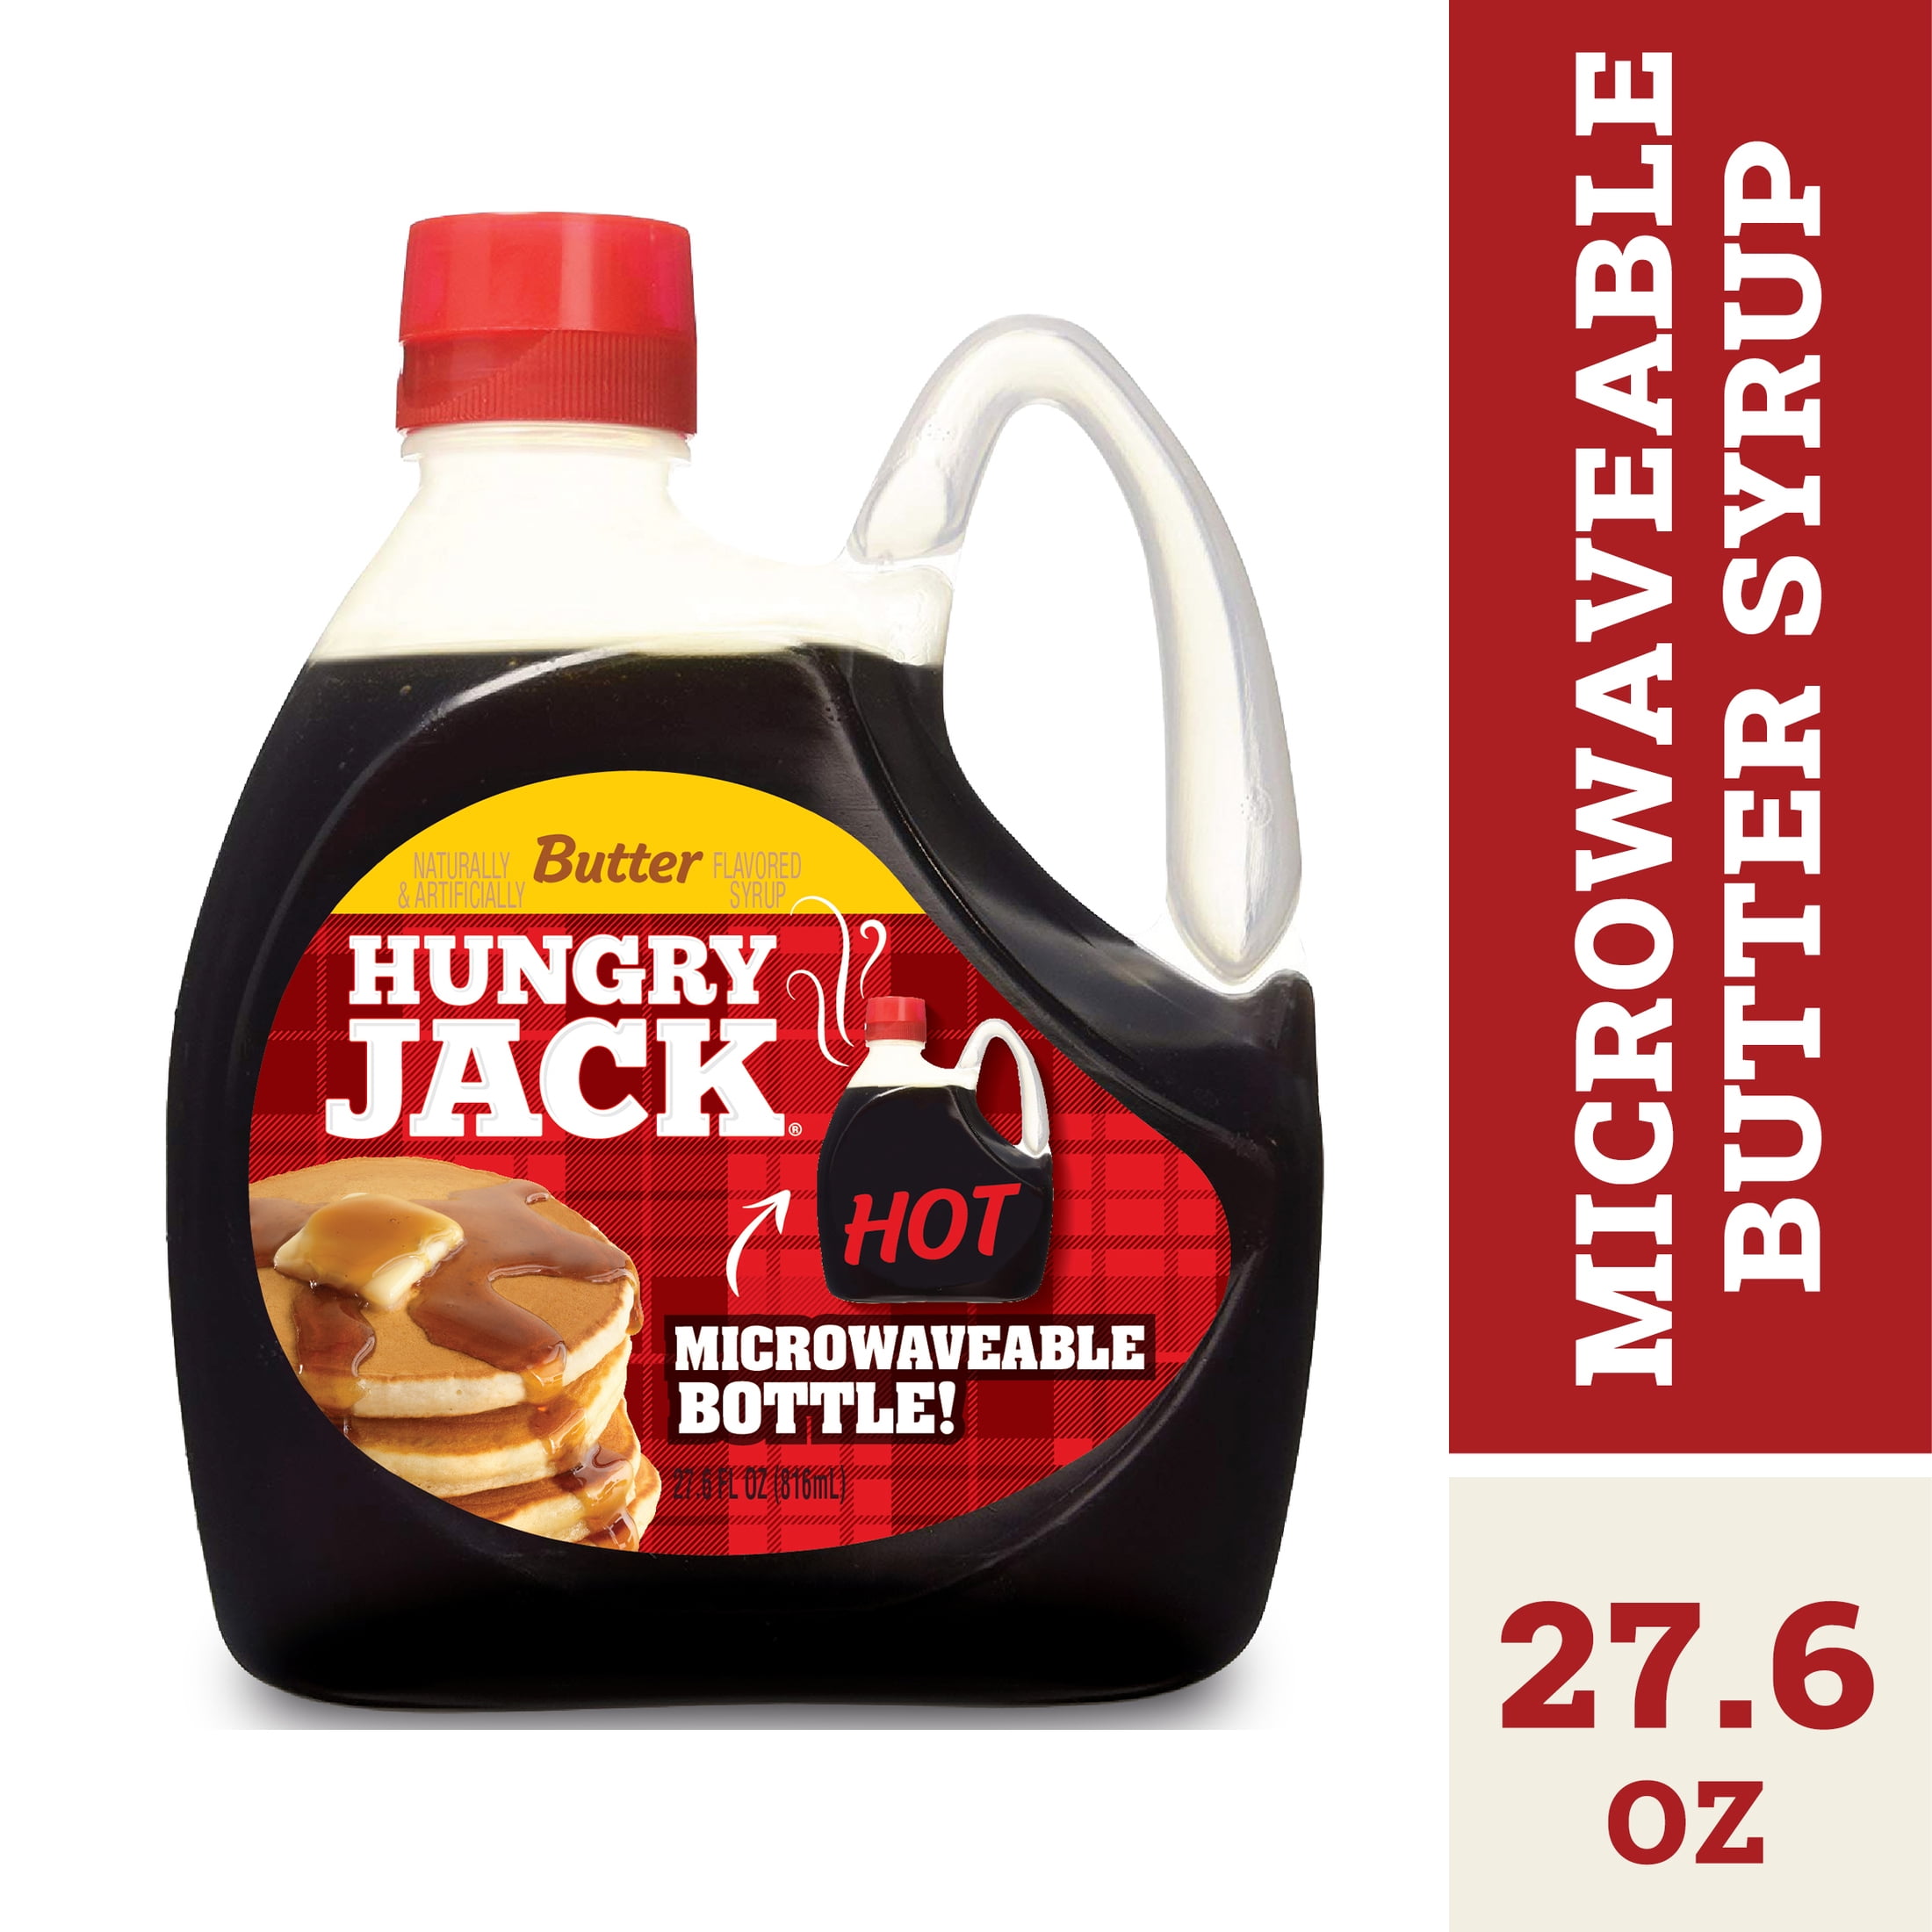 Hungry Jack Butter Flavored Pancake Syrup, 27.6 fl oz Bottle